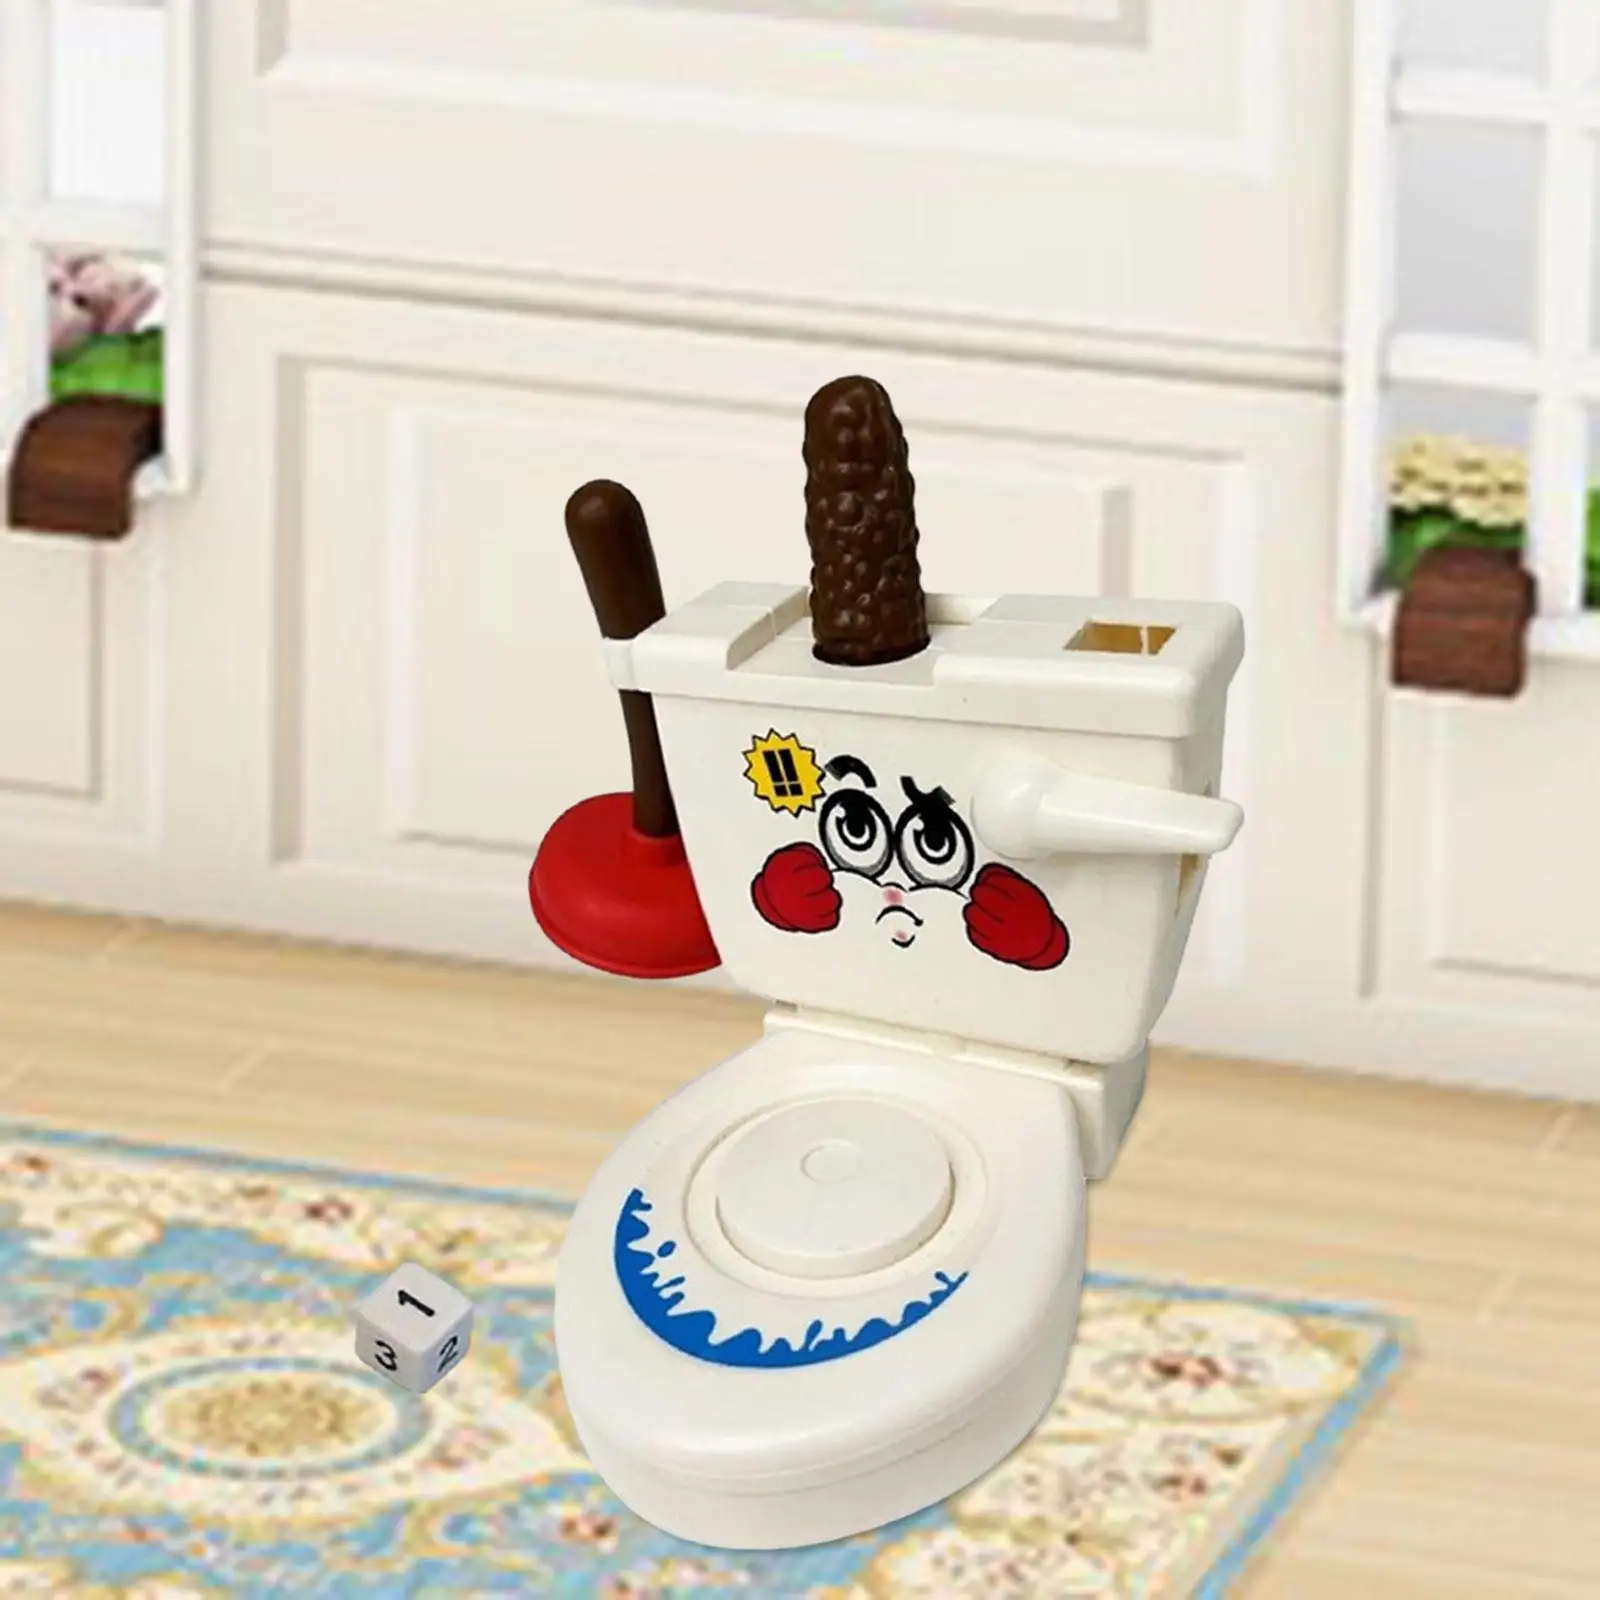 Poop Dexterity Launchers Funny Stool Toilet Toy Poop Game Toilet Poop Toys for Todders Children Kid Girls and Boys Birthday Gift